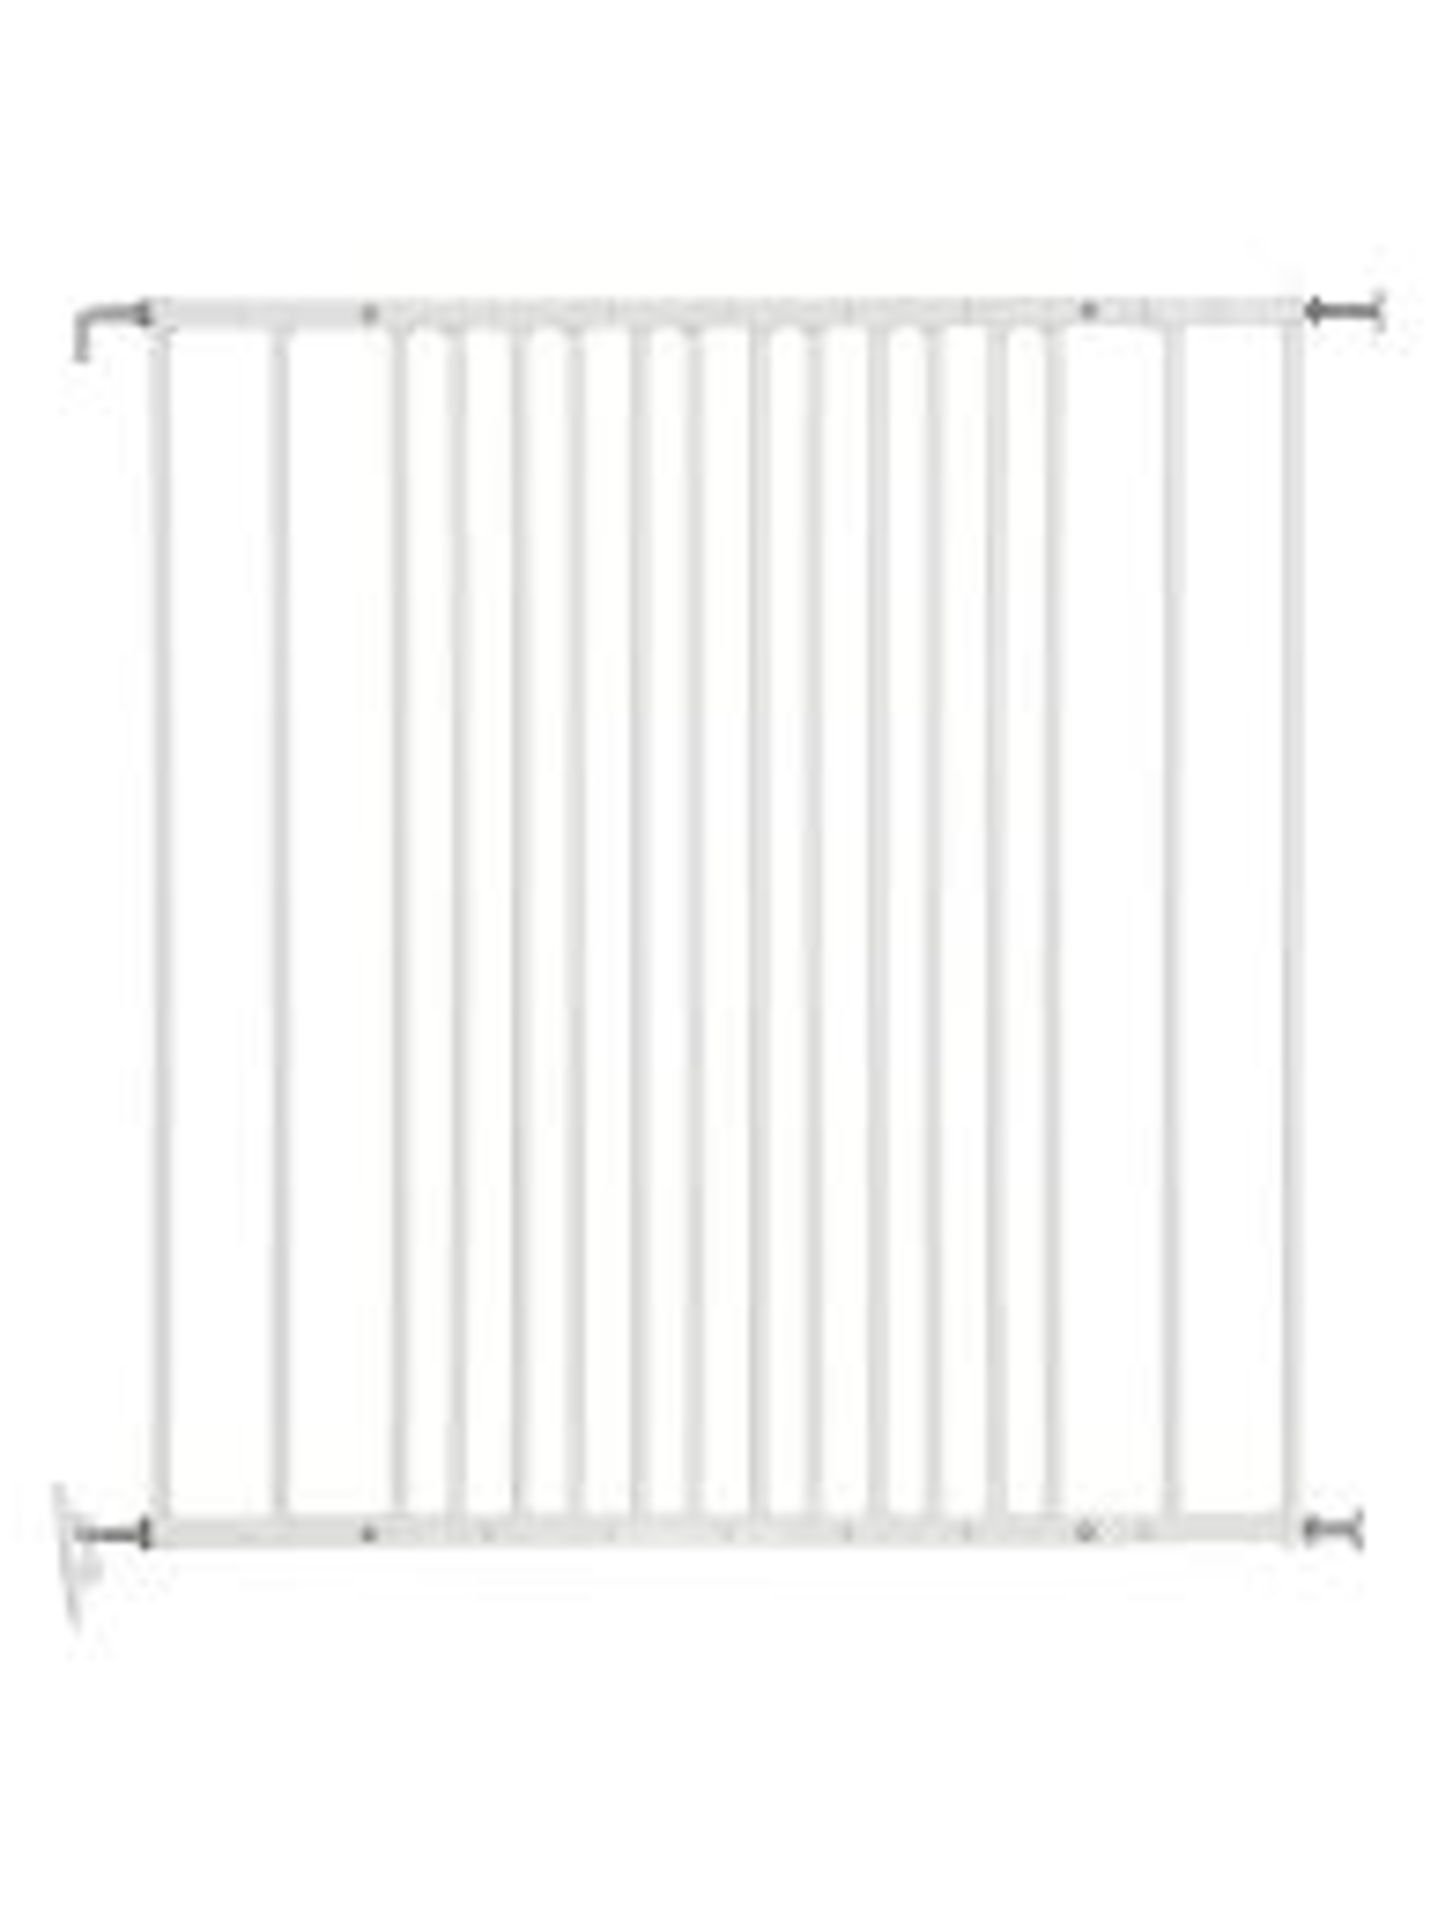 Boxed John Lewis & Partners Extending Metal Baby Safety Gates RRP £25 Each (NBW679384) (NBW58586) (